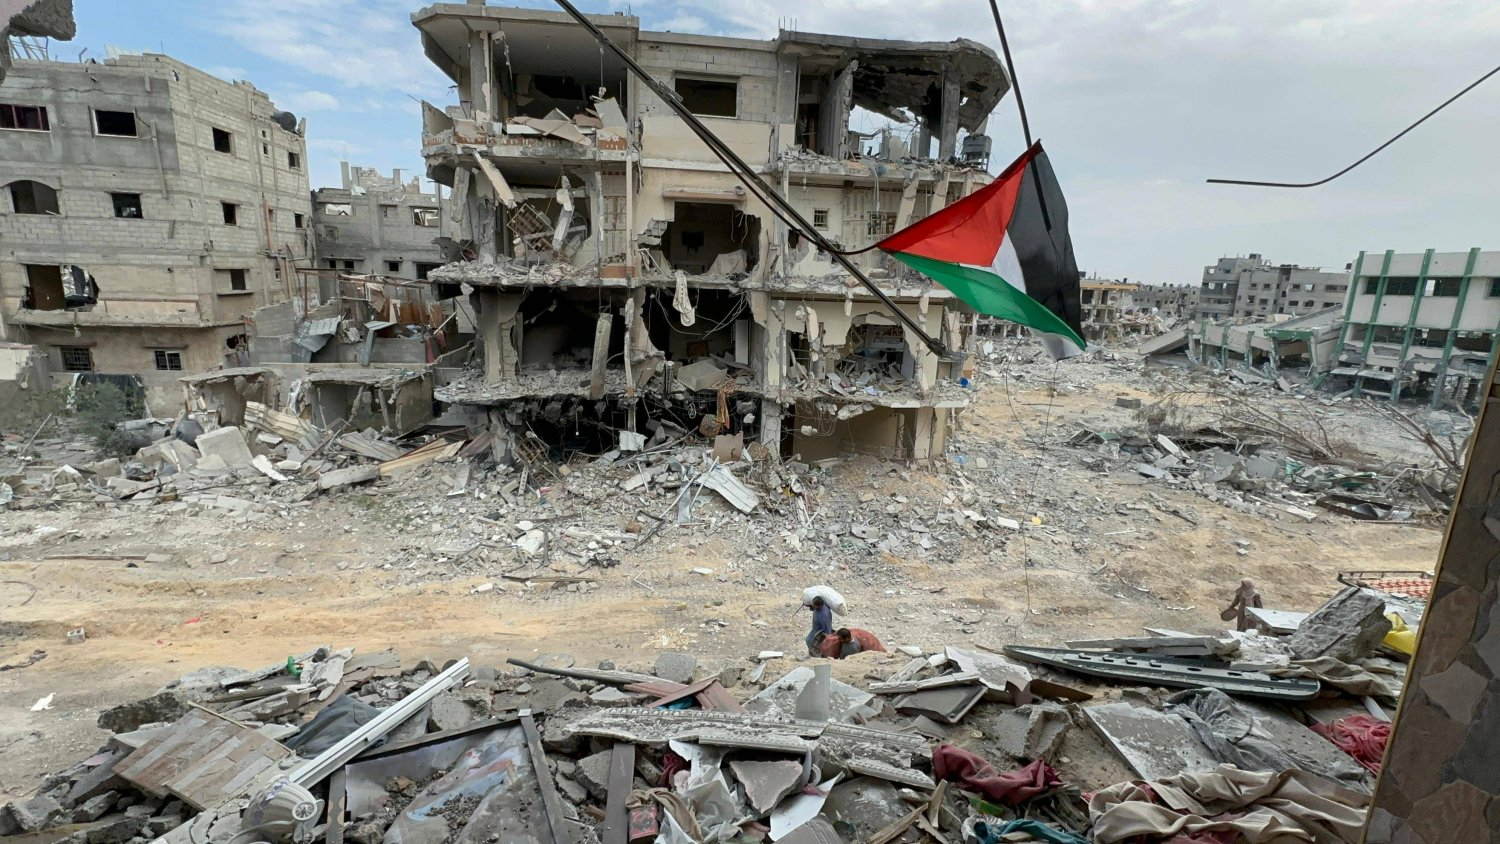 It could take over 14 years to clear debris in war-ravaged Gaza